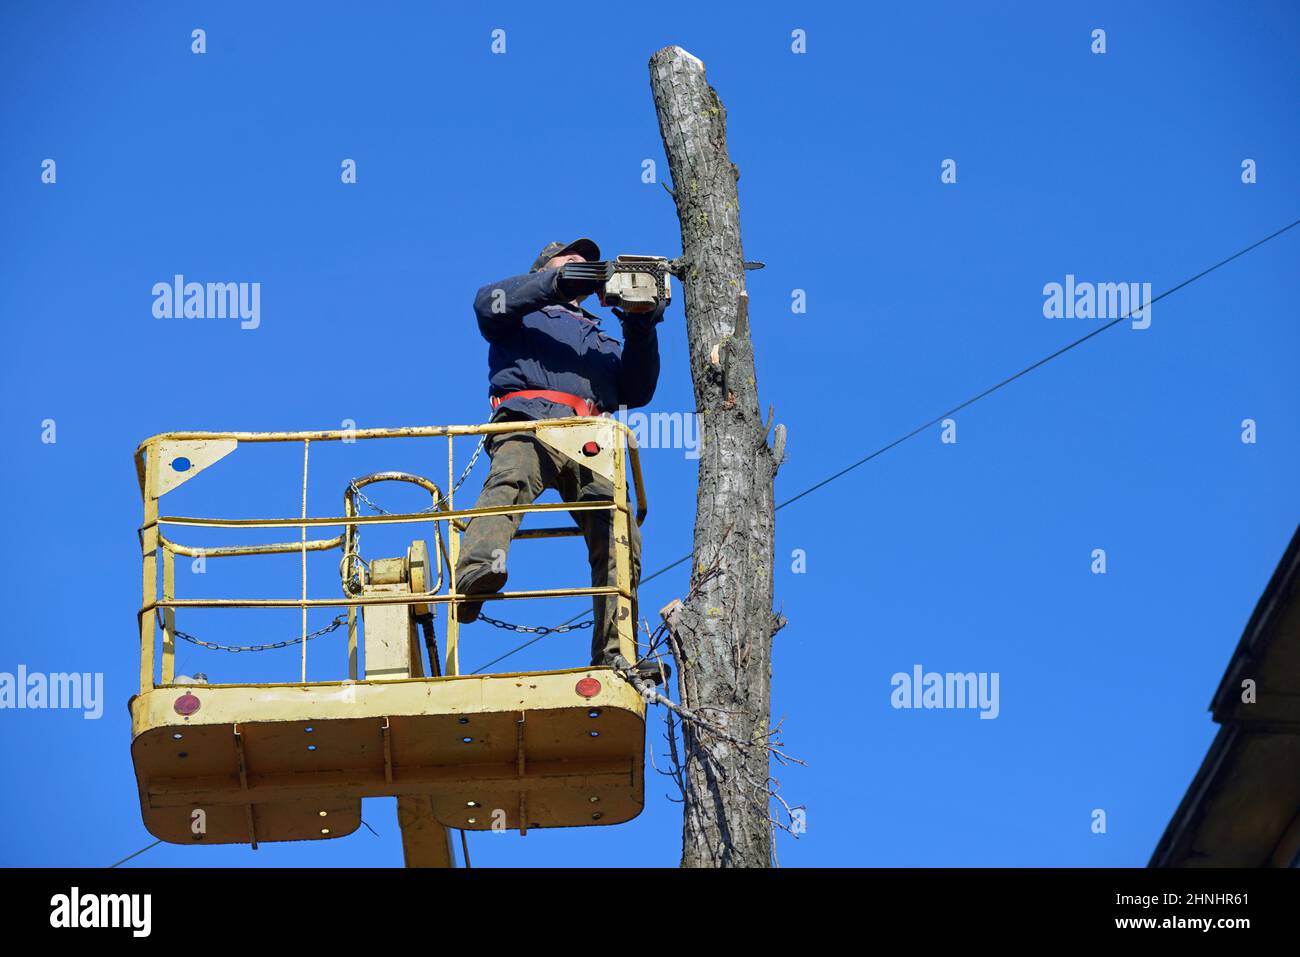 Worker cut dead standing tree with chainsaw using truck-mounted lift. Stock Photo